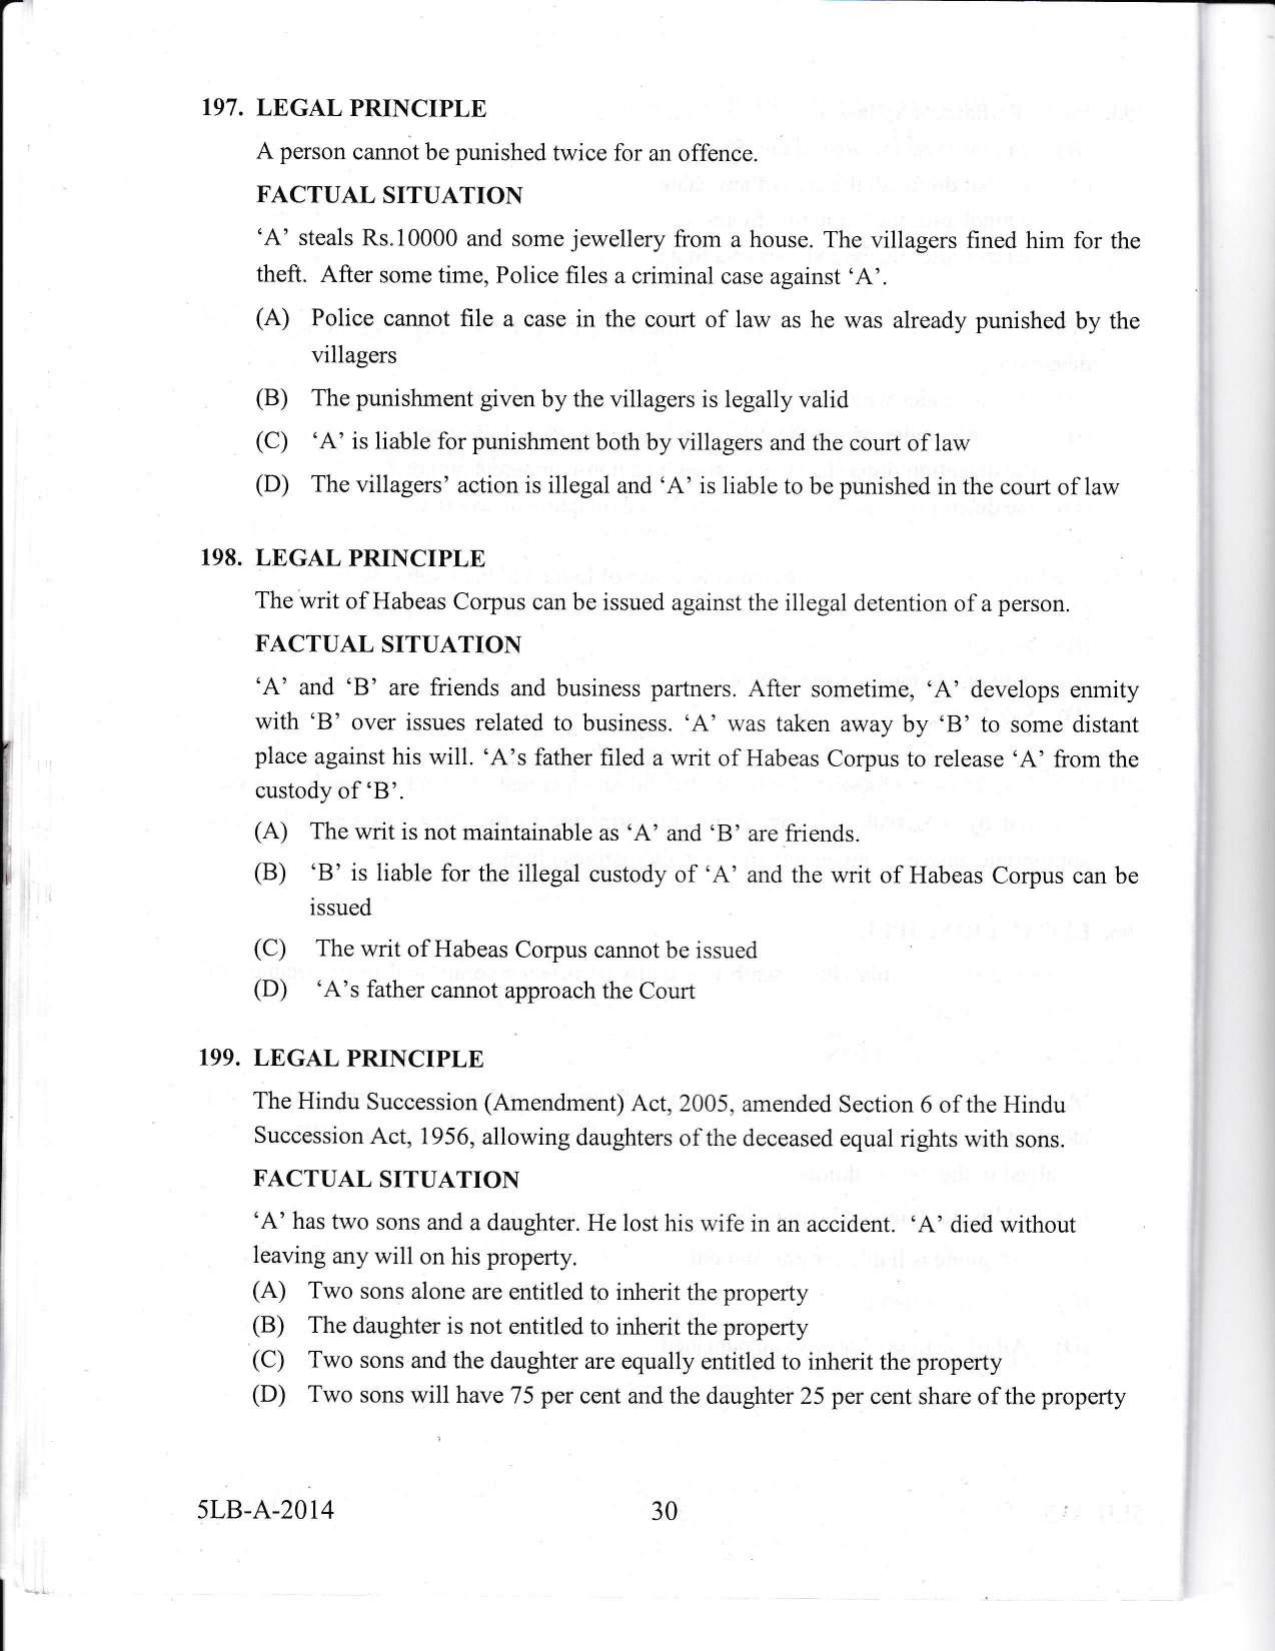 KLEE 5 Year LLB Exam 2014 Question Paper - Page 30